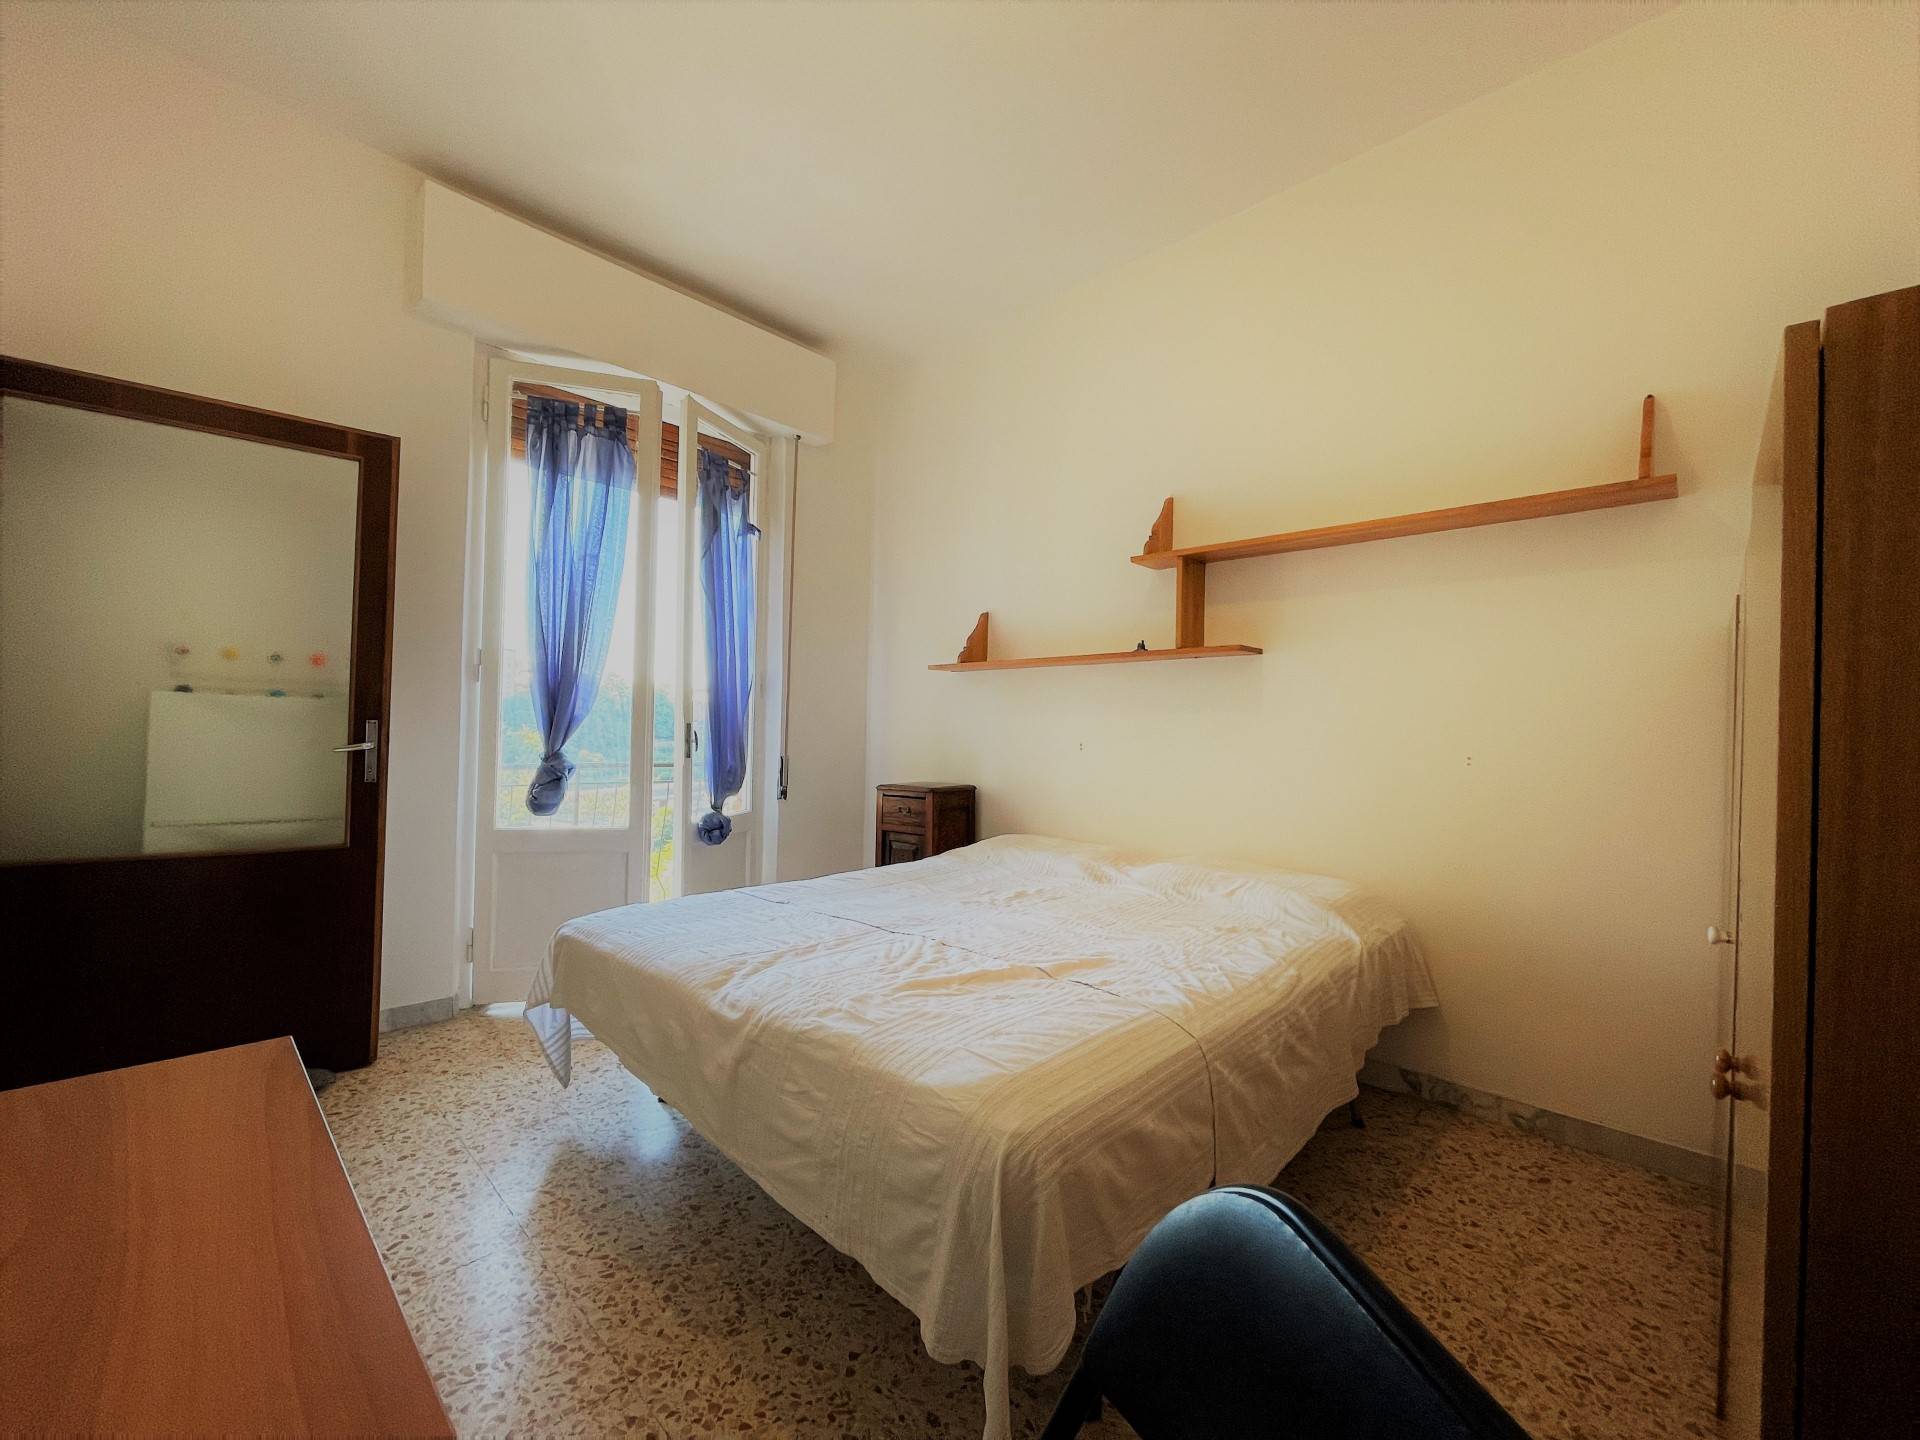 Outside the city walls of Siena, in the Pescaia area, well-served by public transport, we offer a four bedroom apartment on the first floor of a 